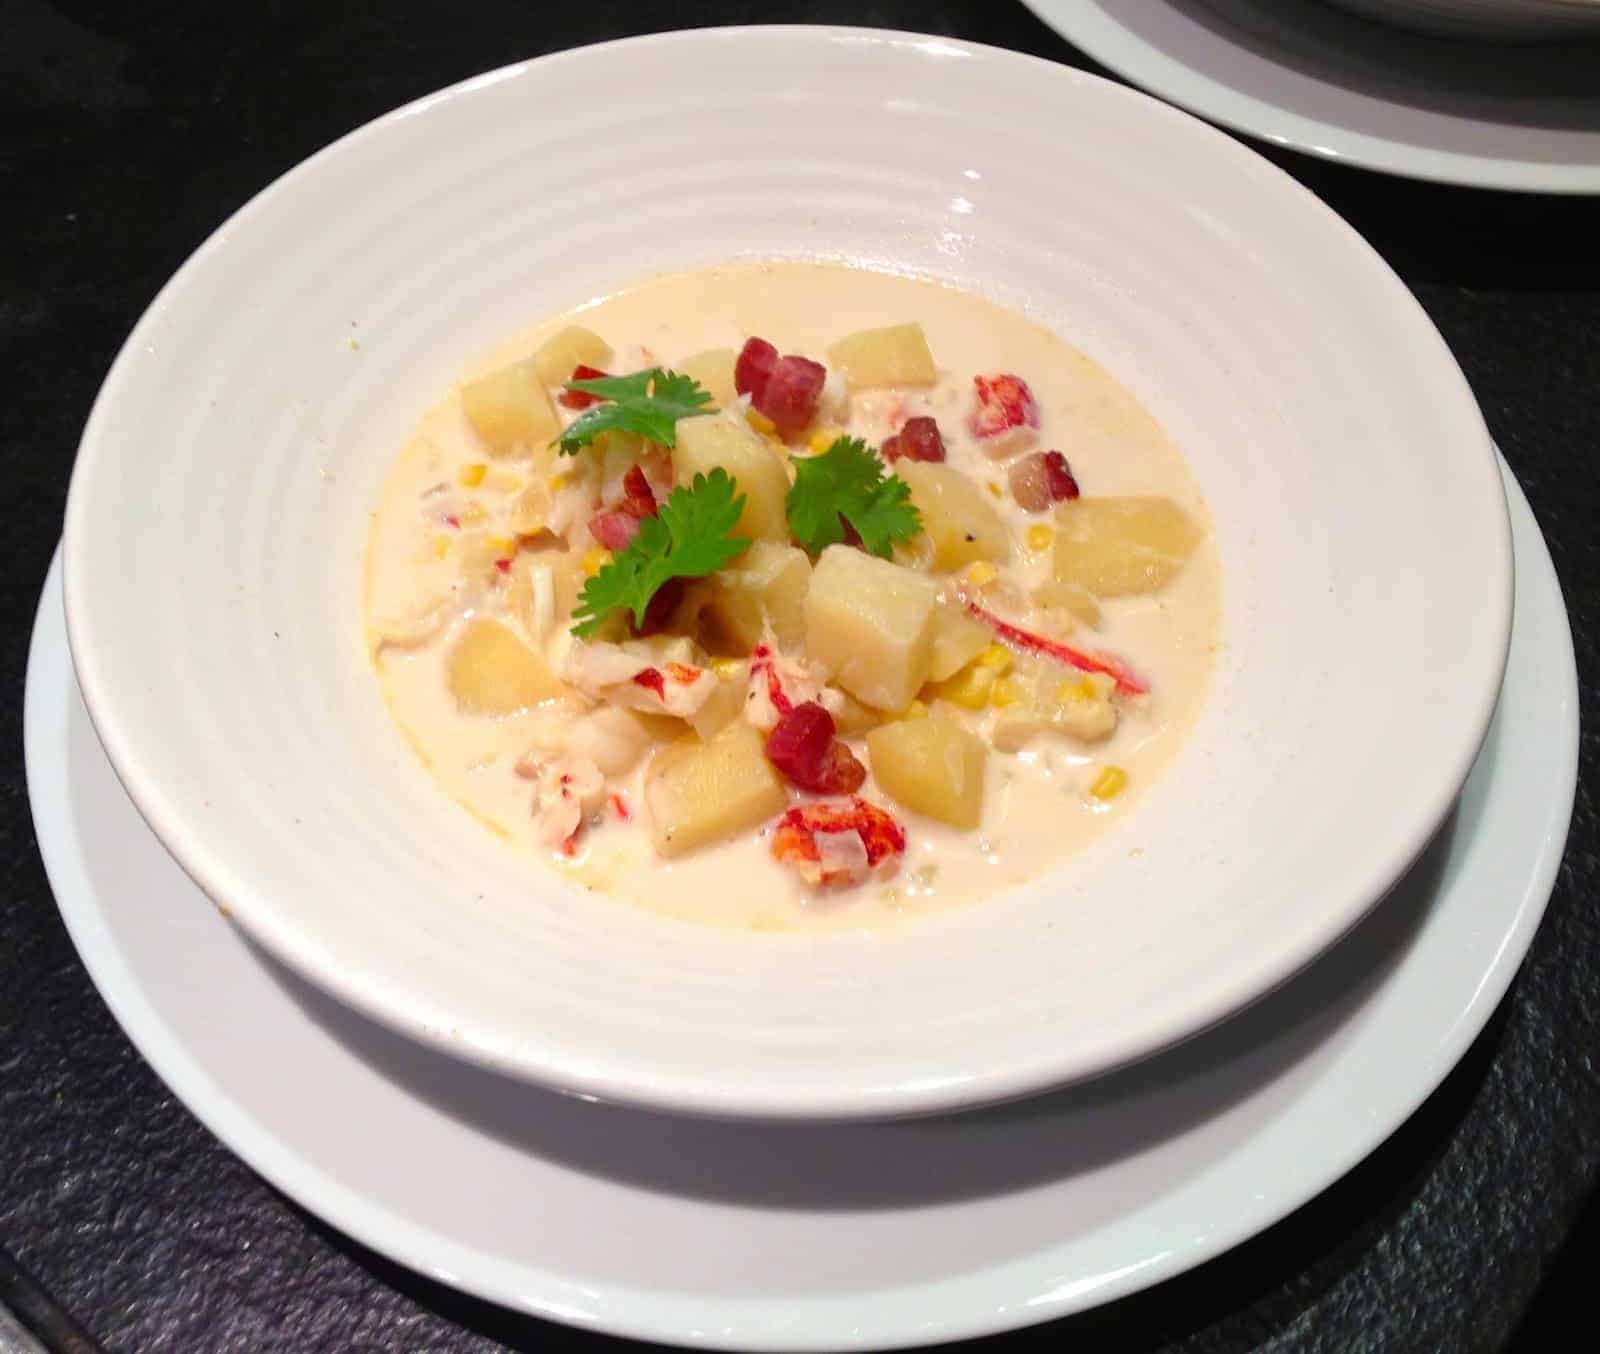 Two Recipes that have Summer in the Hamptons written all over them! Lobster and Corn Chowder and Peach Blueberry Crisp